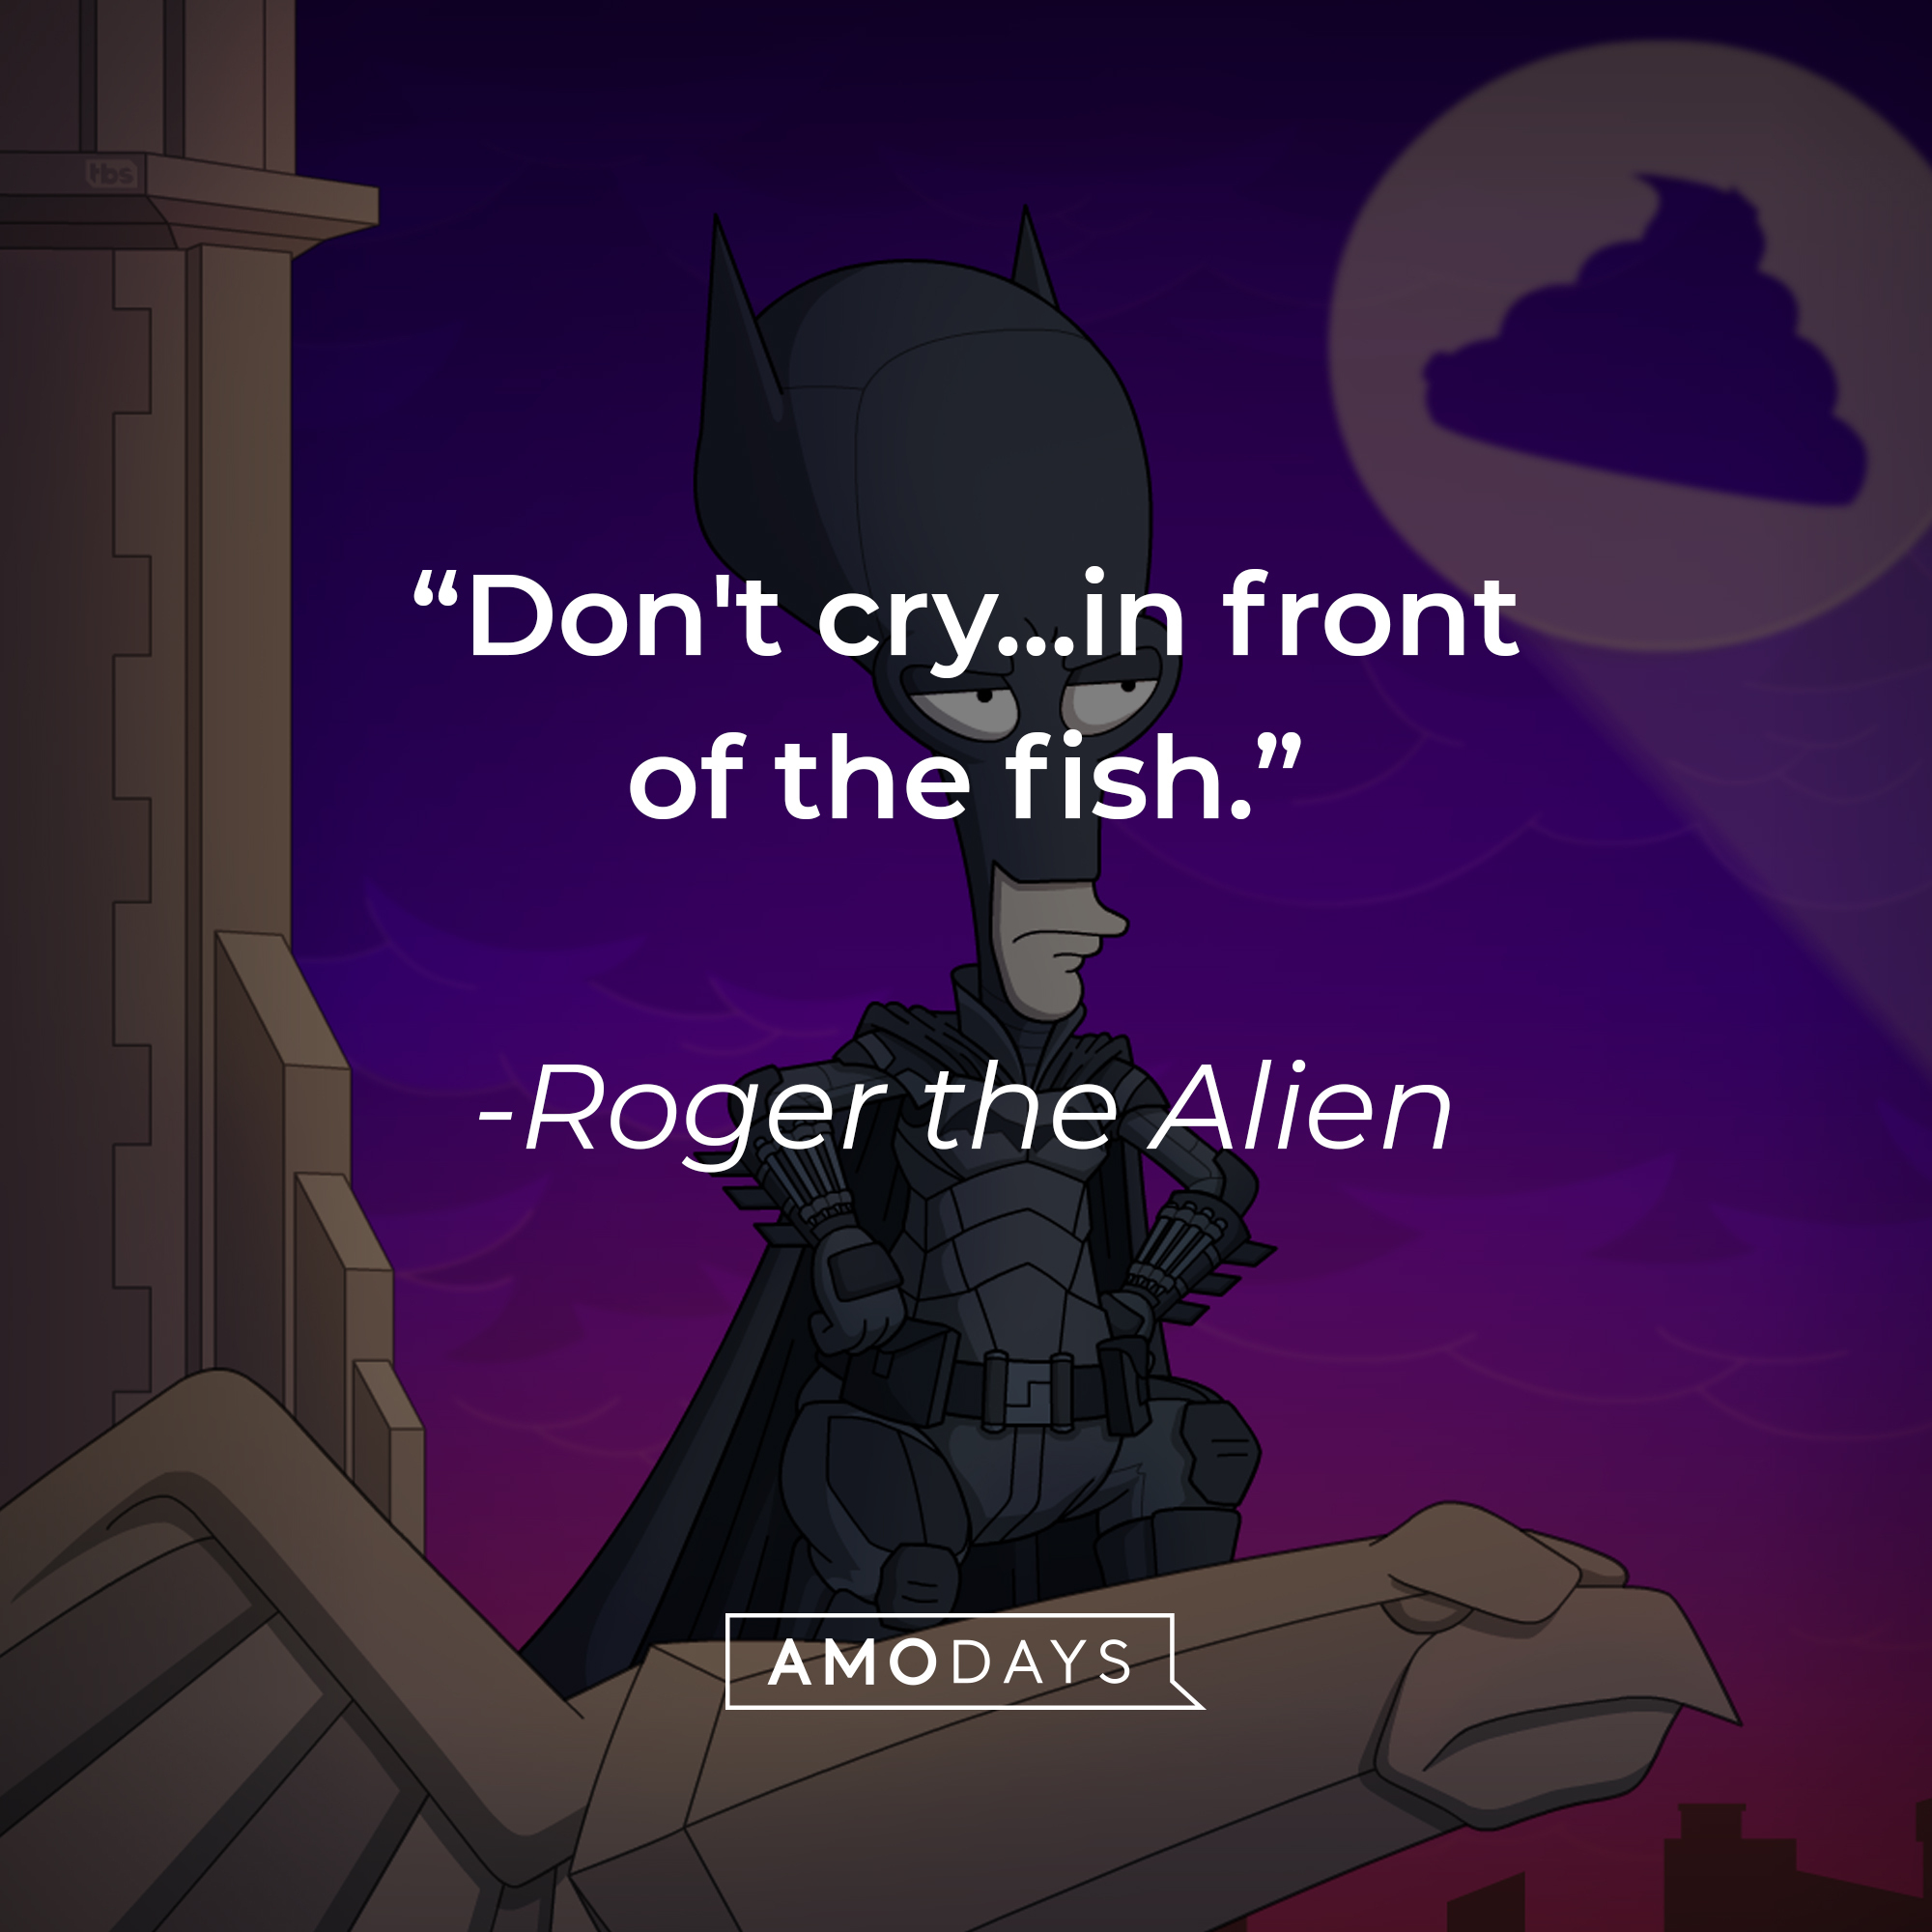 Roger the Alien with his quote: “Don't cry...in front of the fish.” | Source: facebook.com/AmericanDad